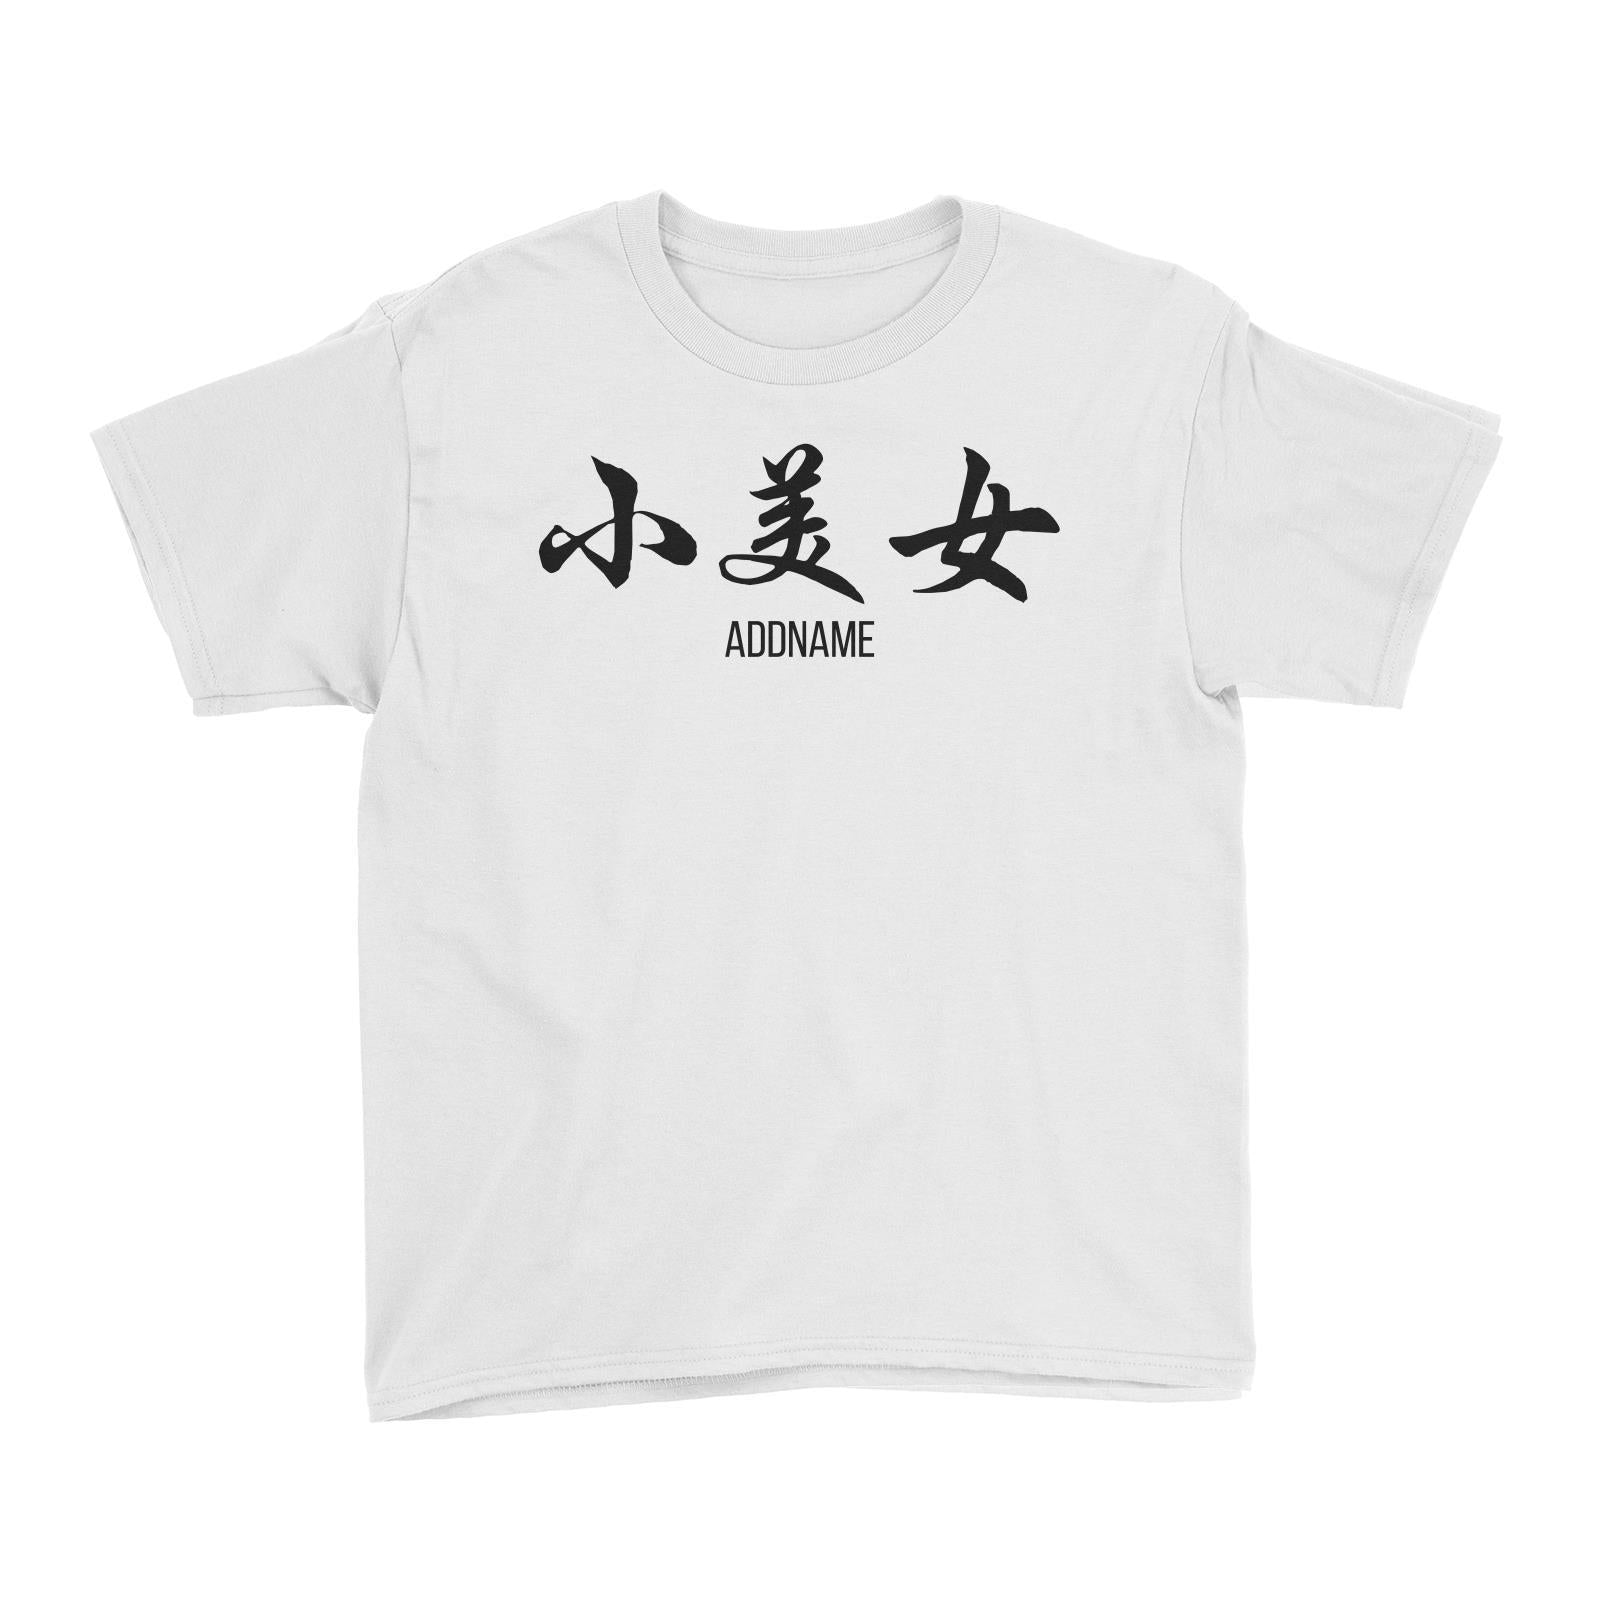 Small Pretty Lady in Chinese Calligraphy Kid's T-Shirt